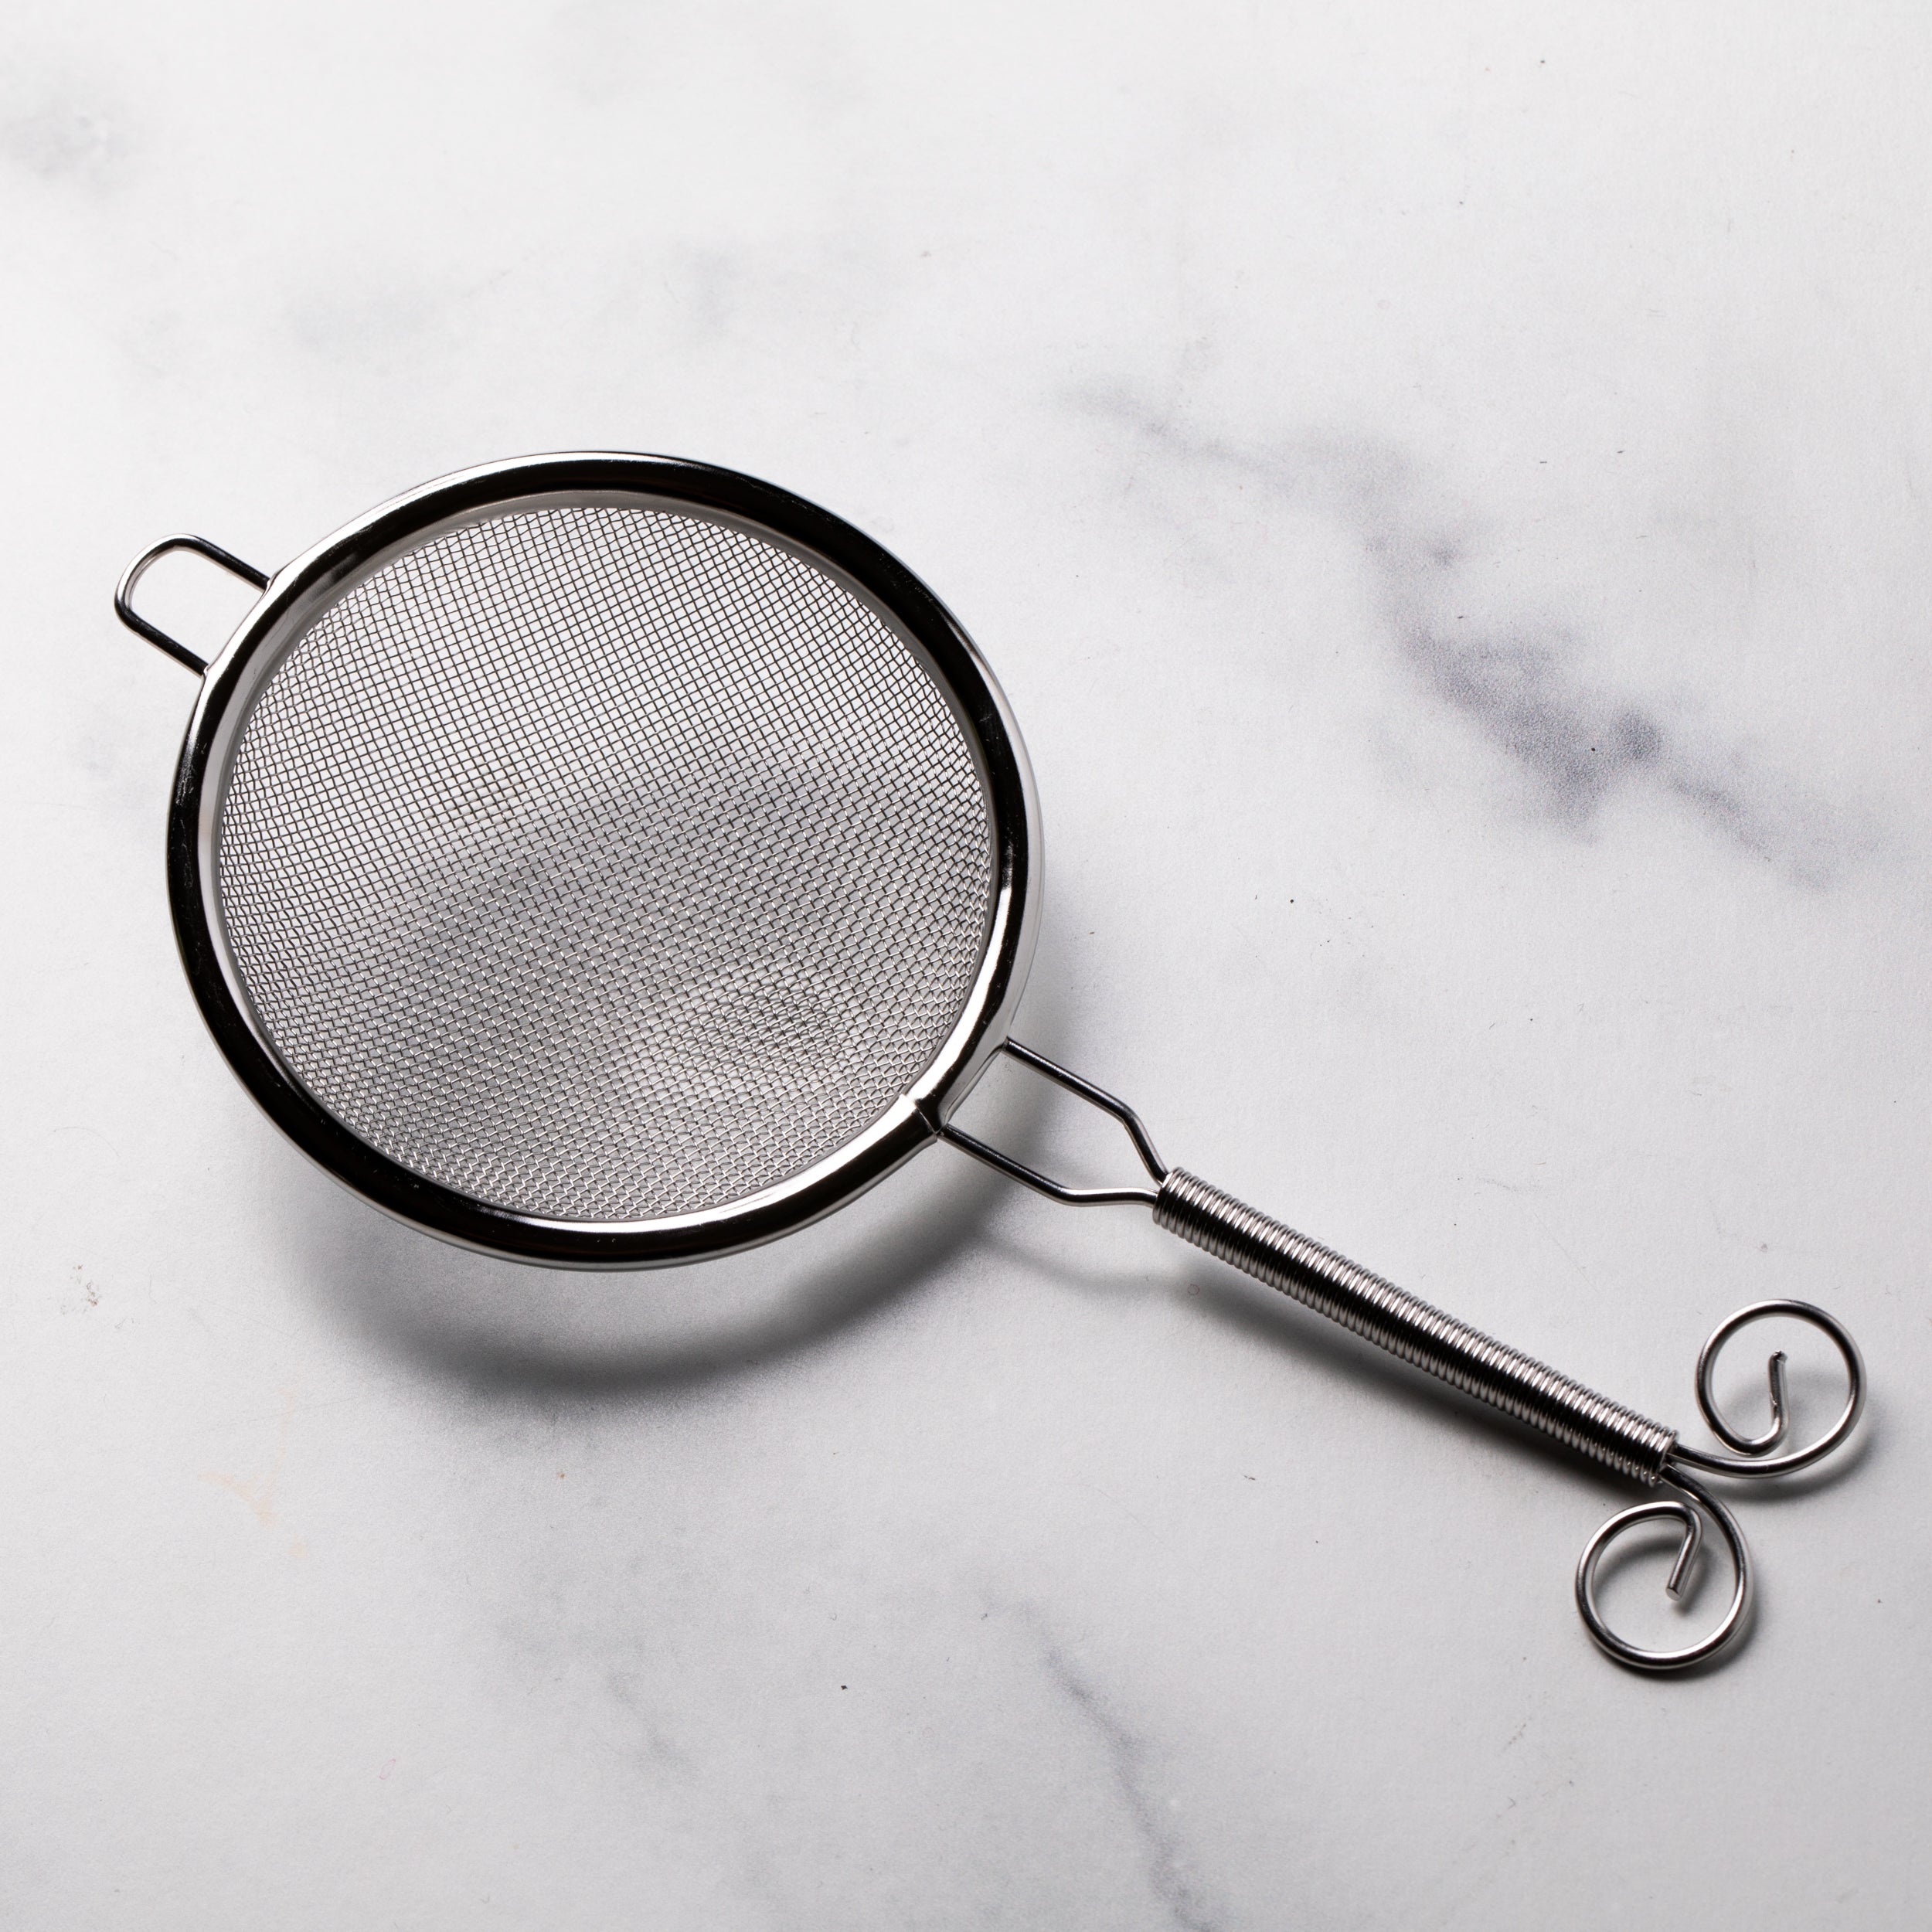 Round stainless steel sifter with a handle.